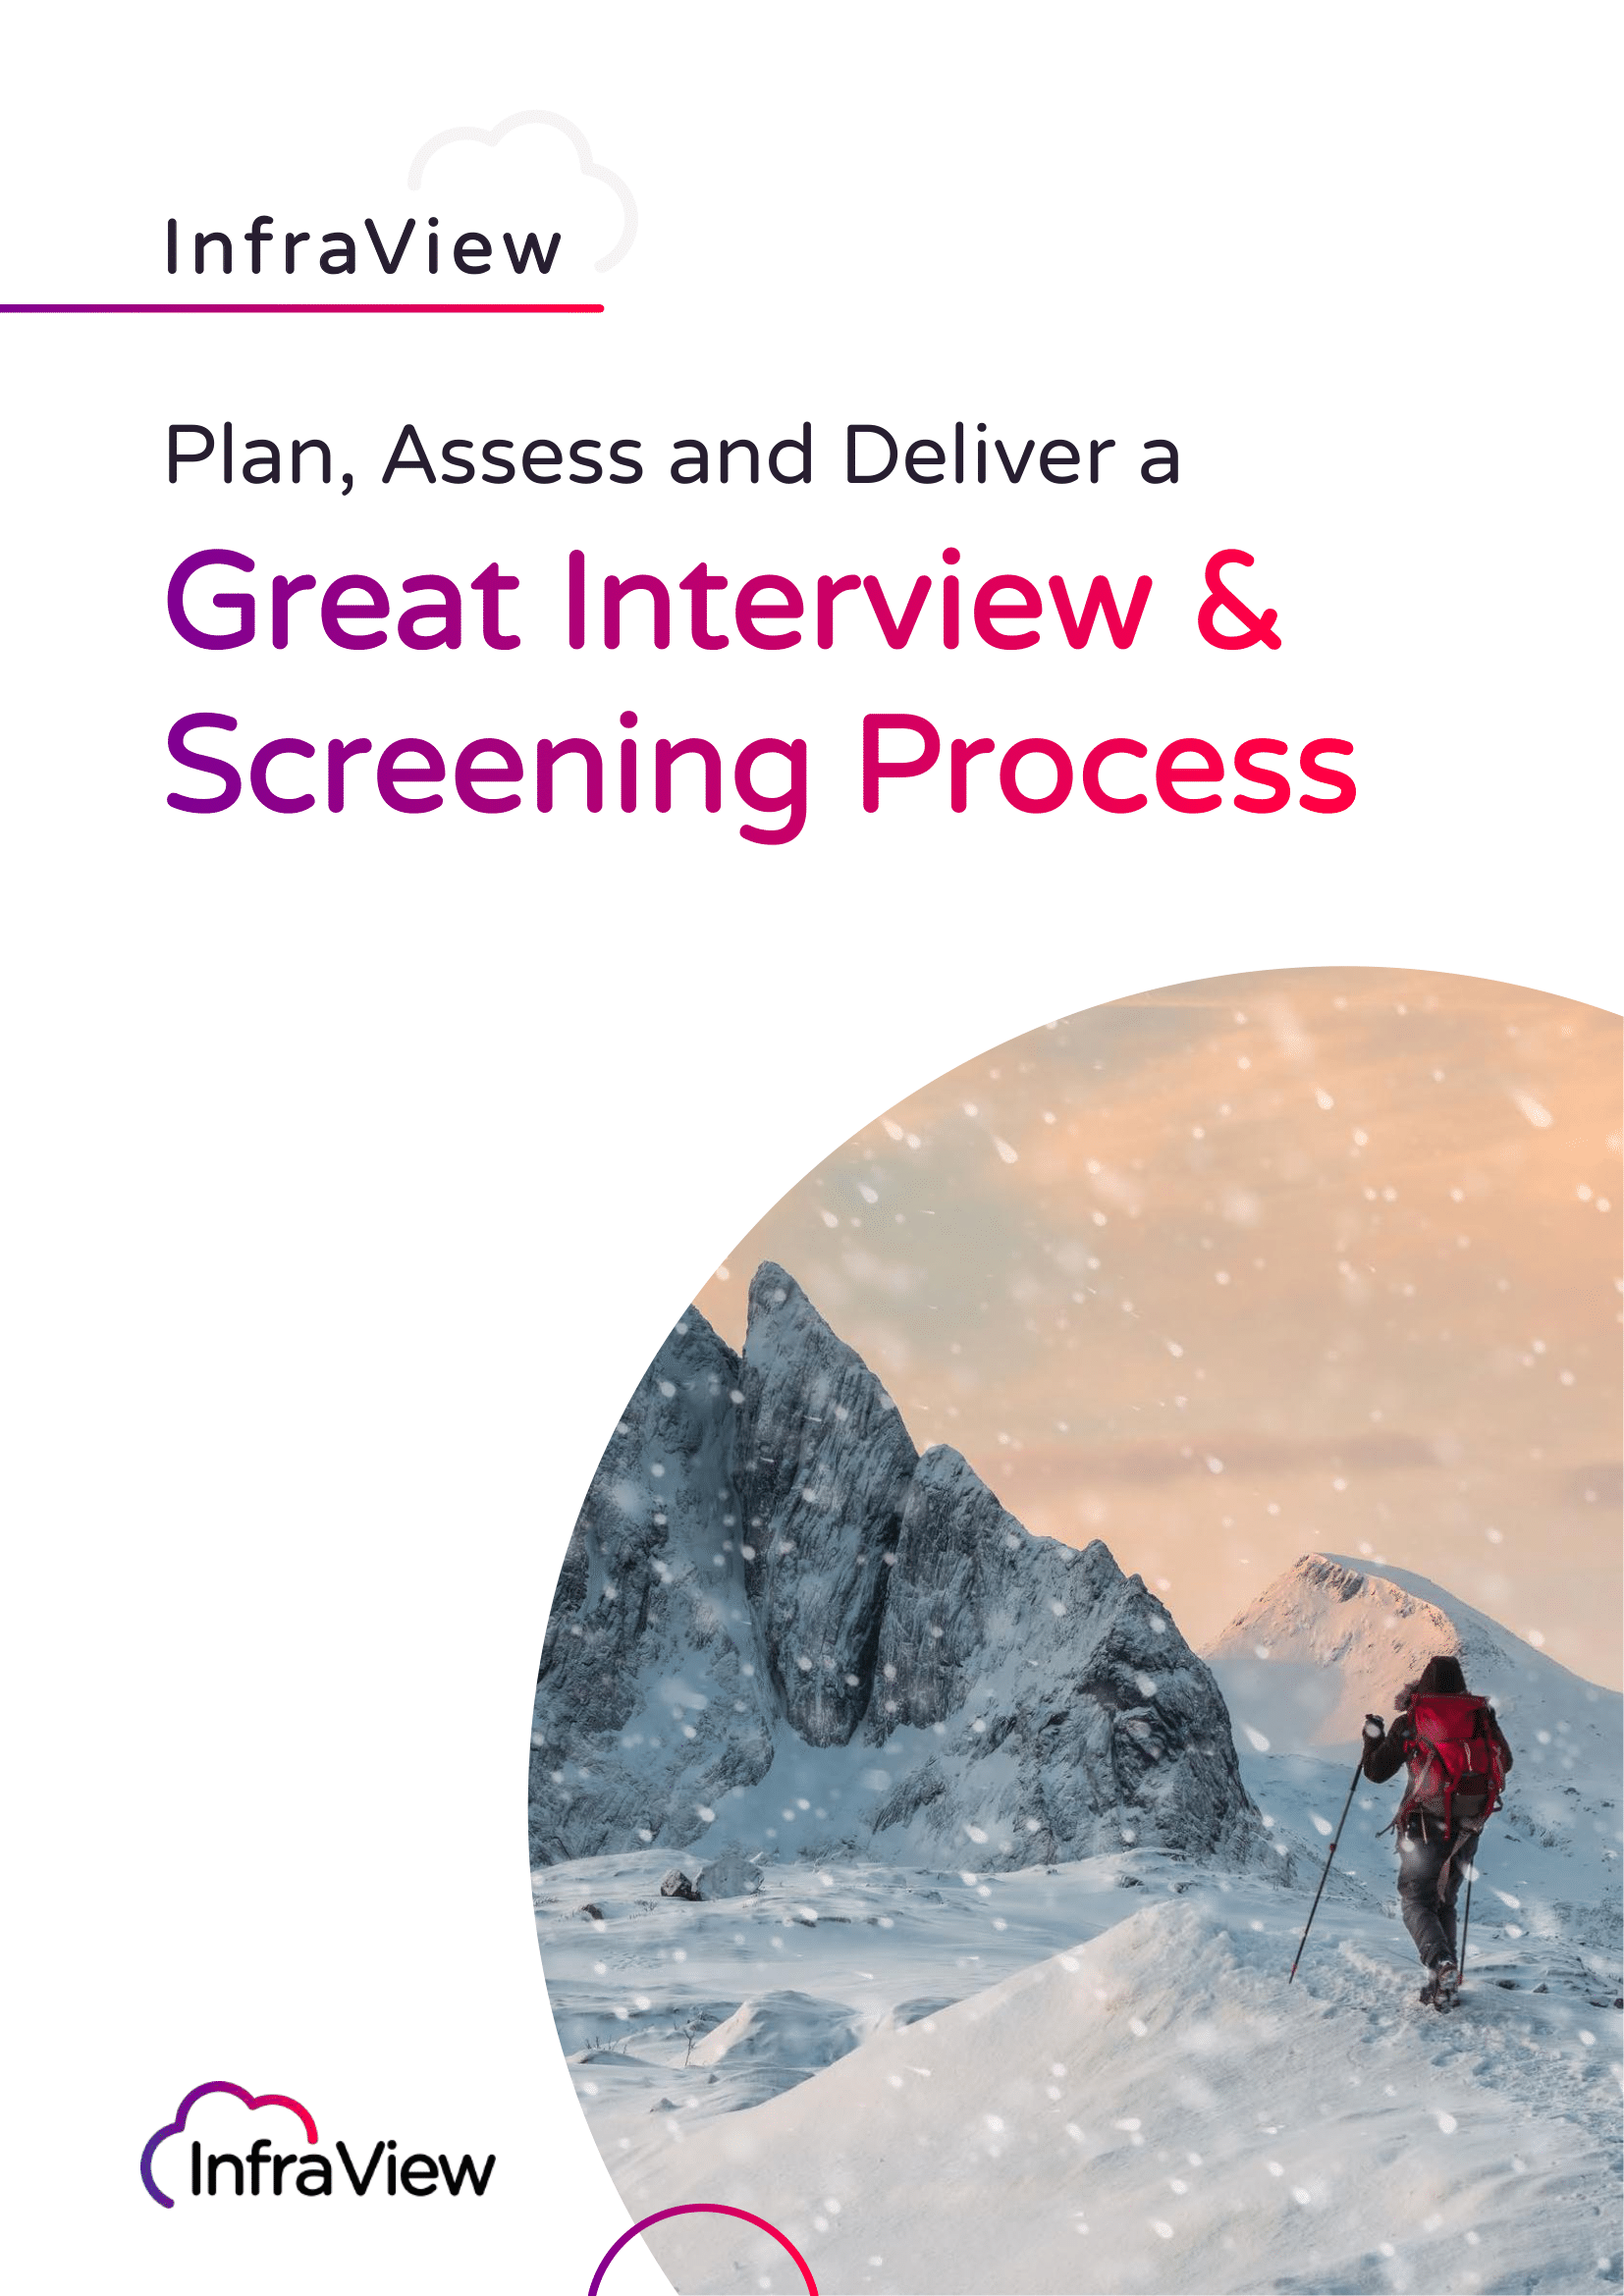 Plan, Assess and Deliver a Great Interview & Screening Process